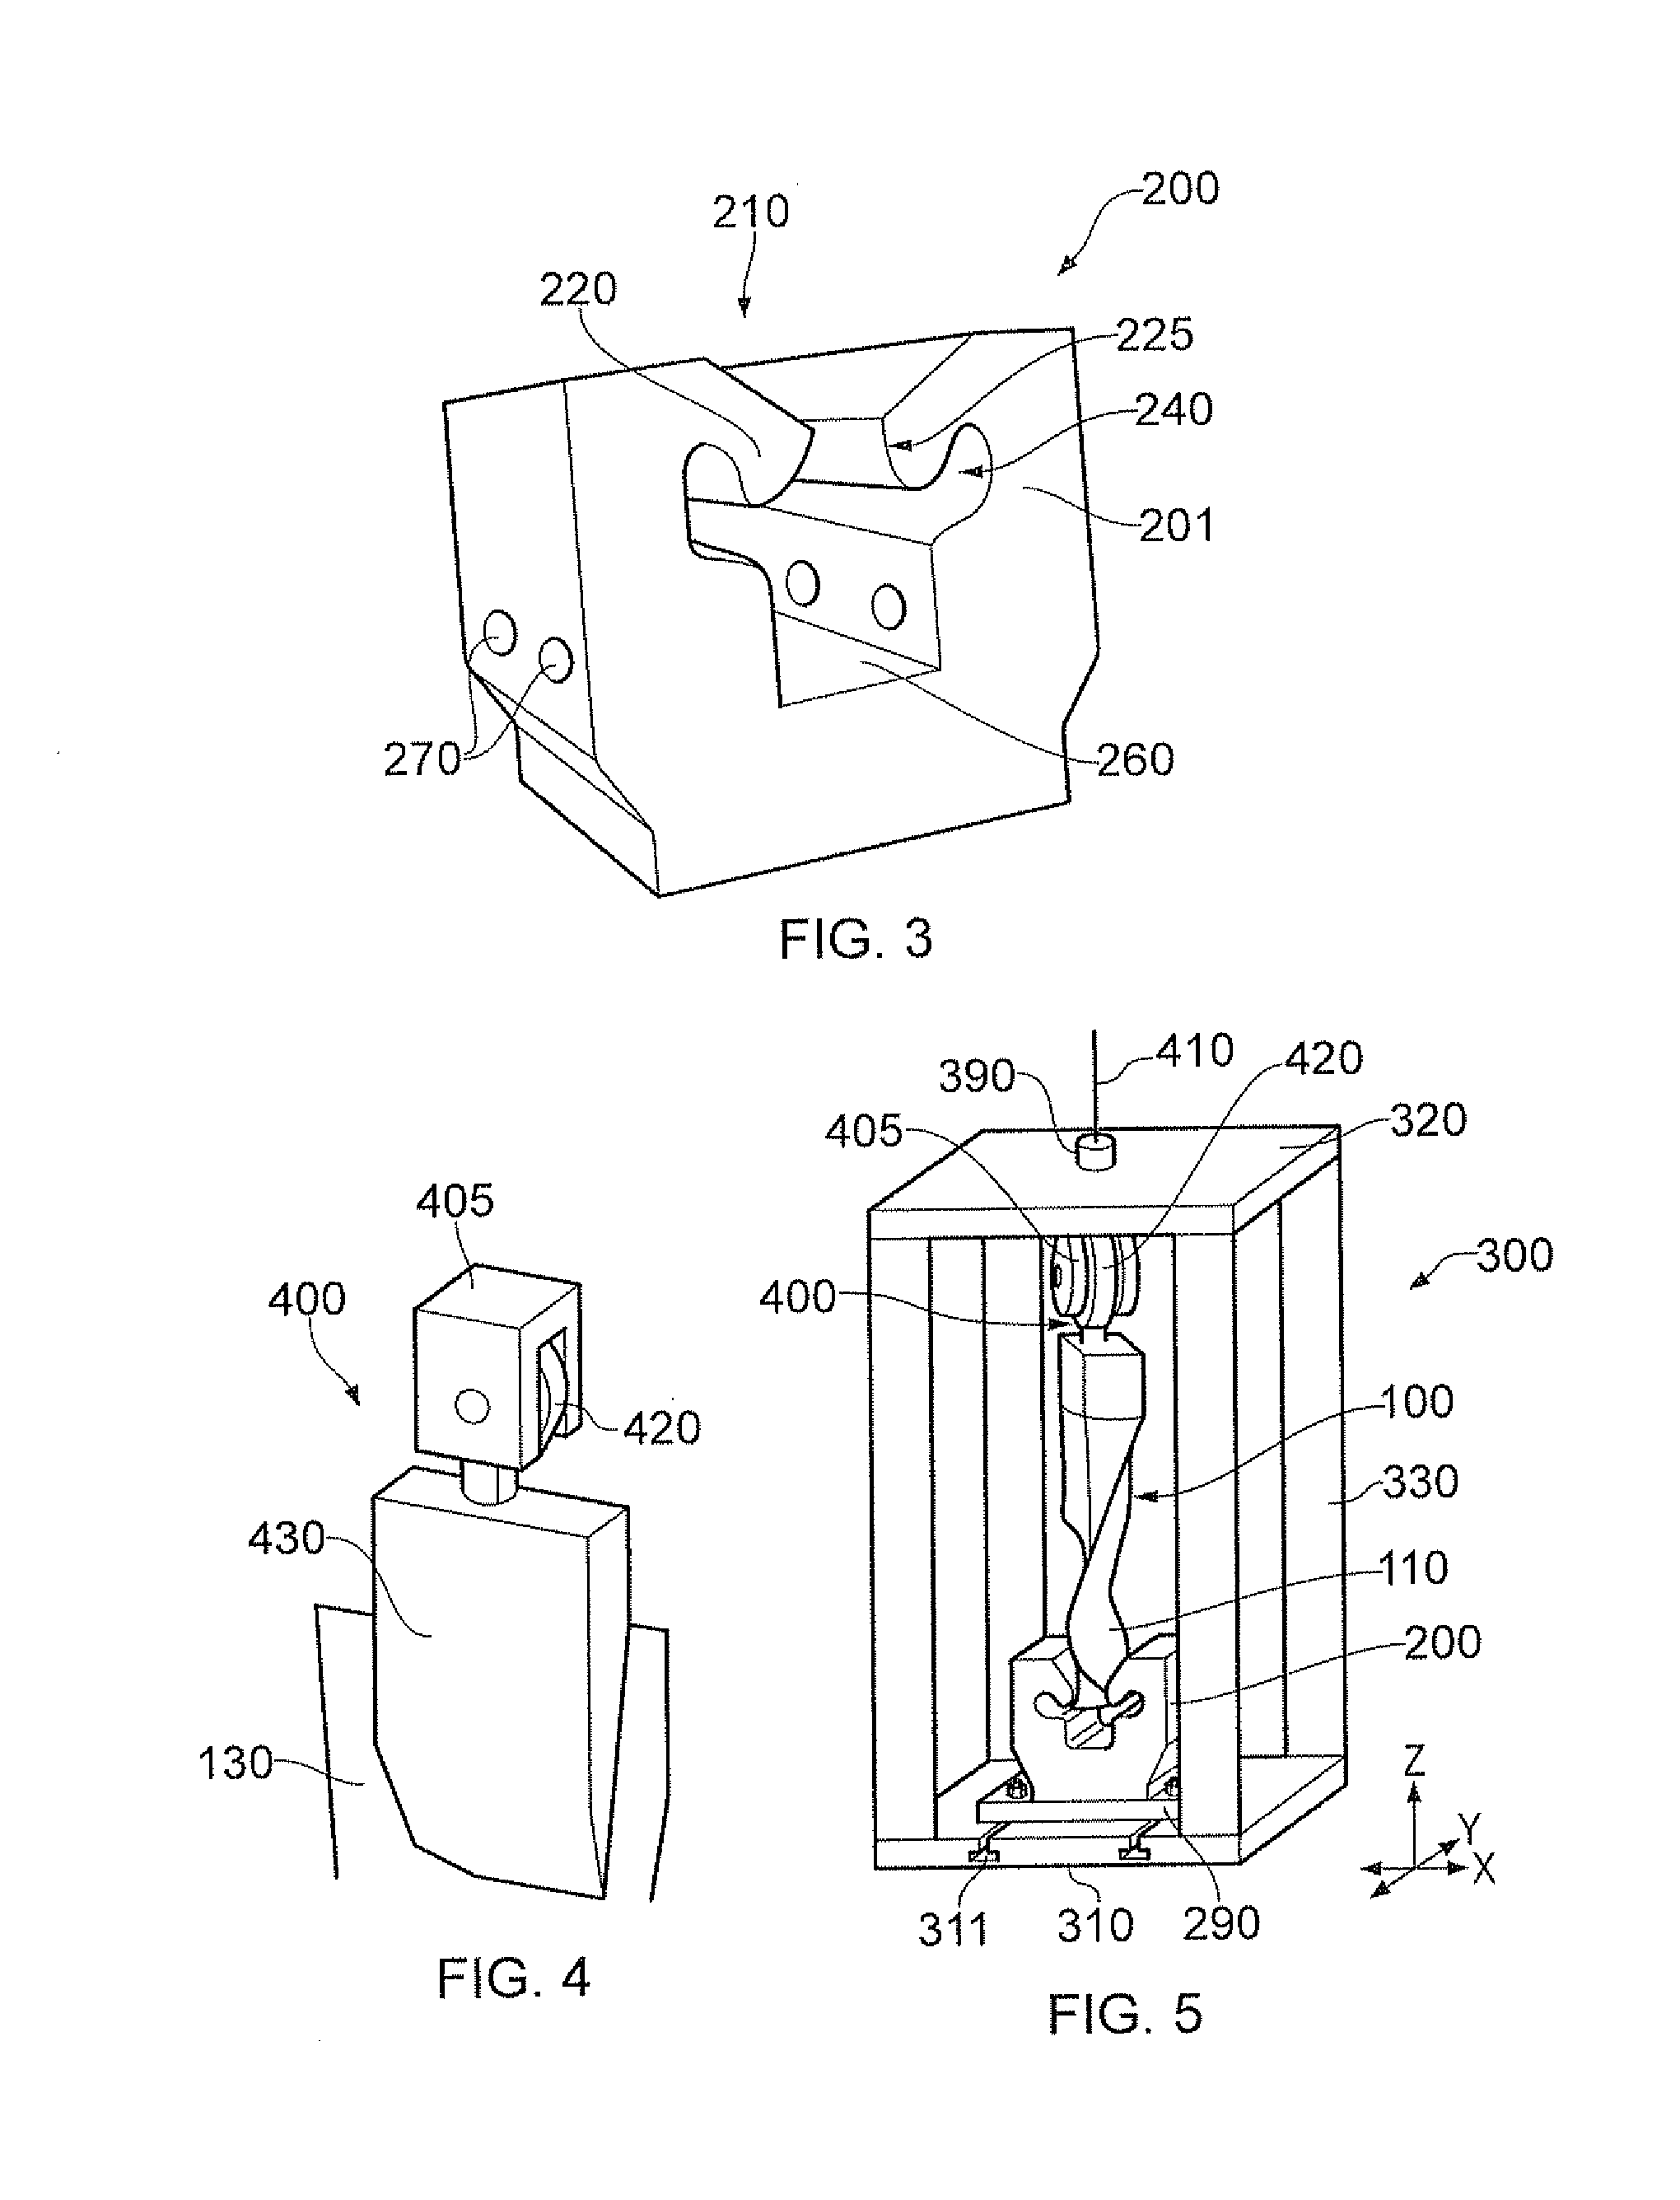 Apparatus and method for simulating lifetime of and/or stress experienced by a rotor blade and rotor disc fixture